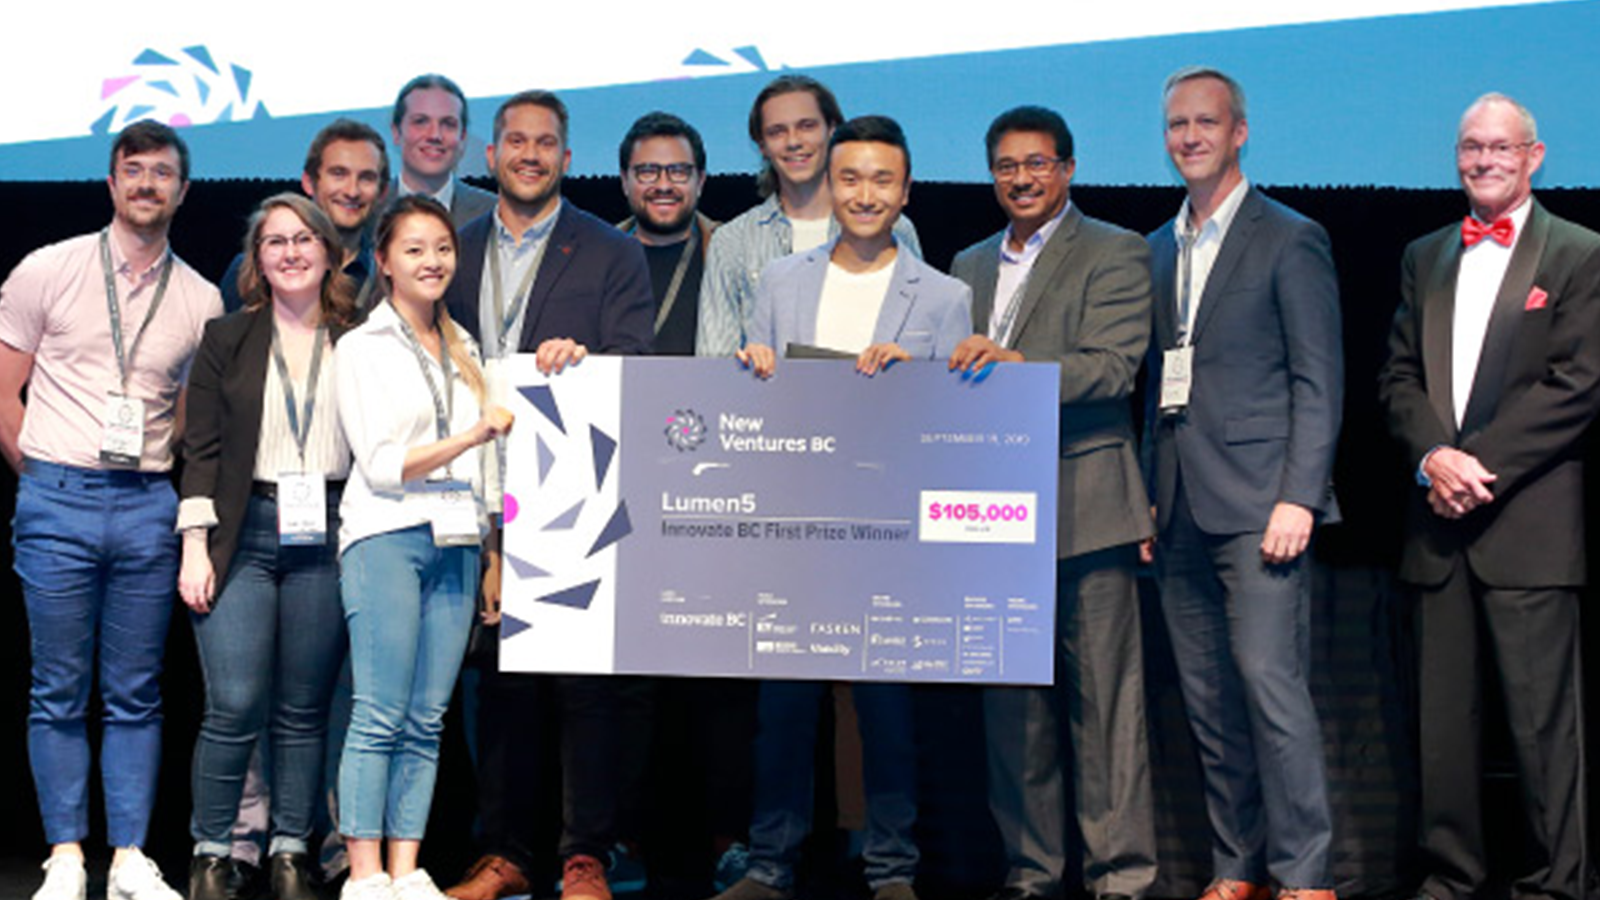 2019 New Ventures BC Competition awards - who won?